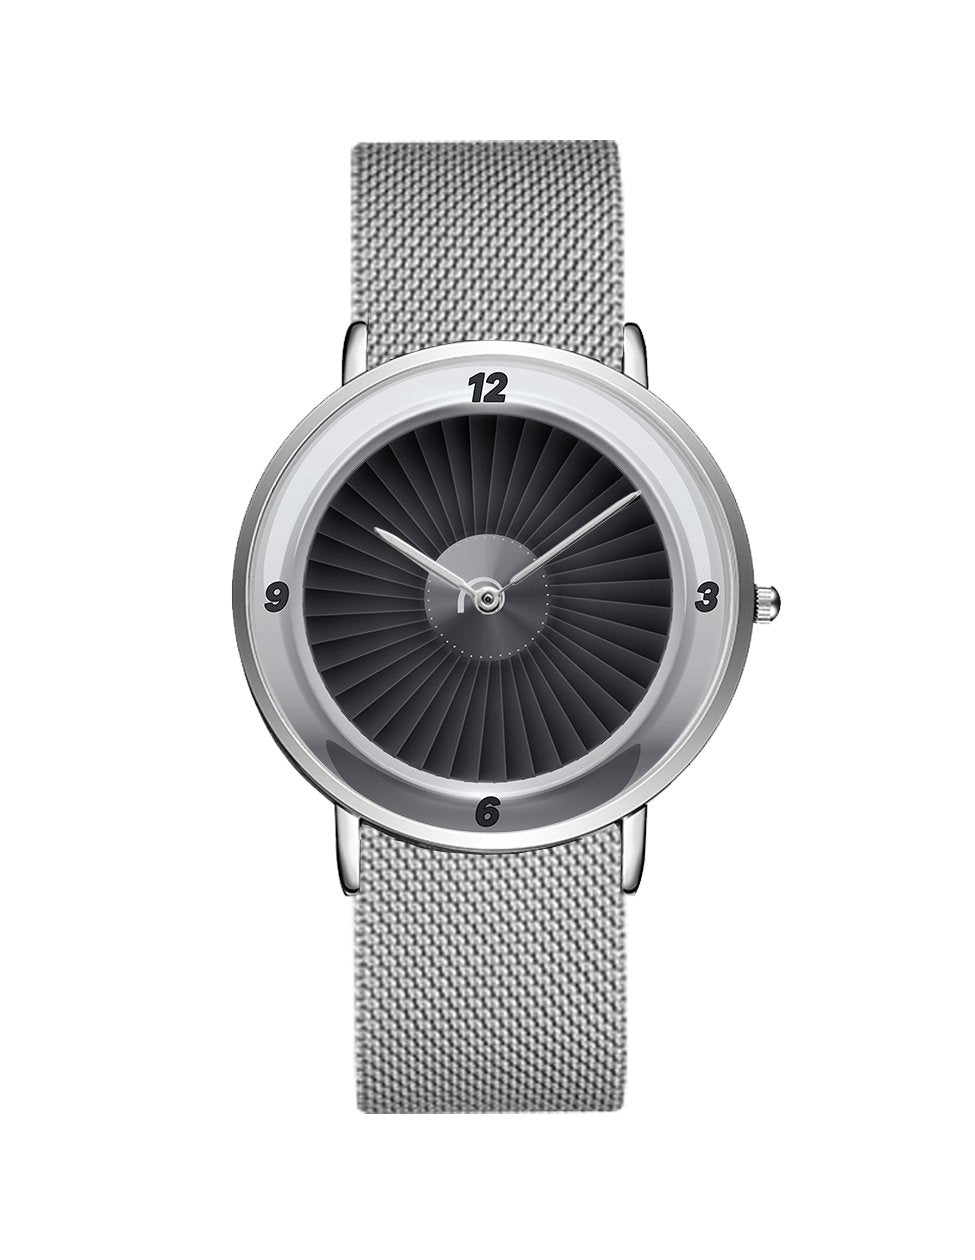 Jet Engine Designed Stainless Steel Strap Watches Pilot Eyes Store Silver & Silver Stainless Steel Strap 